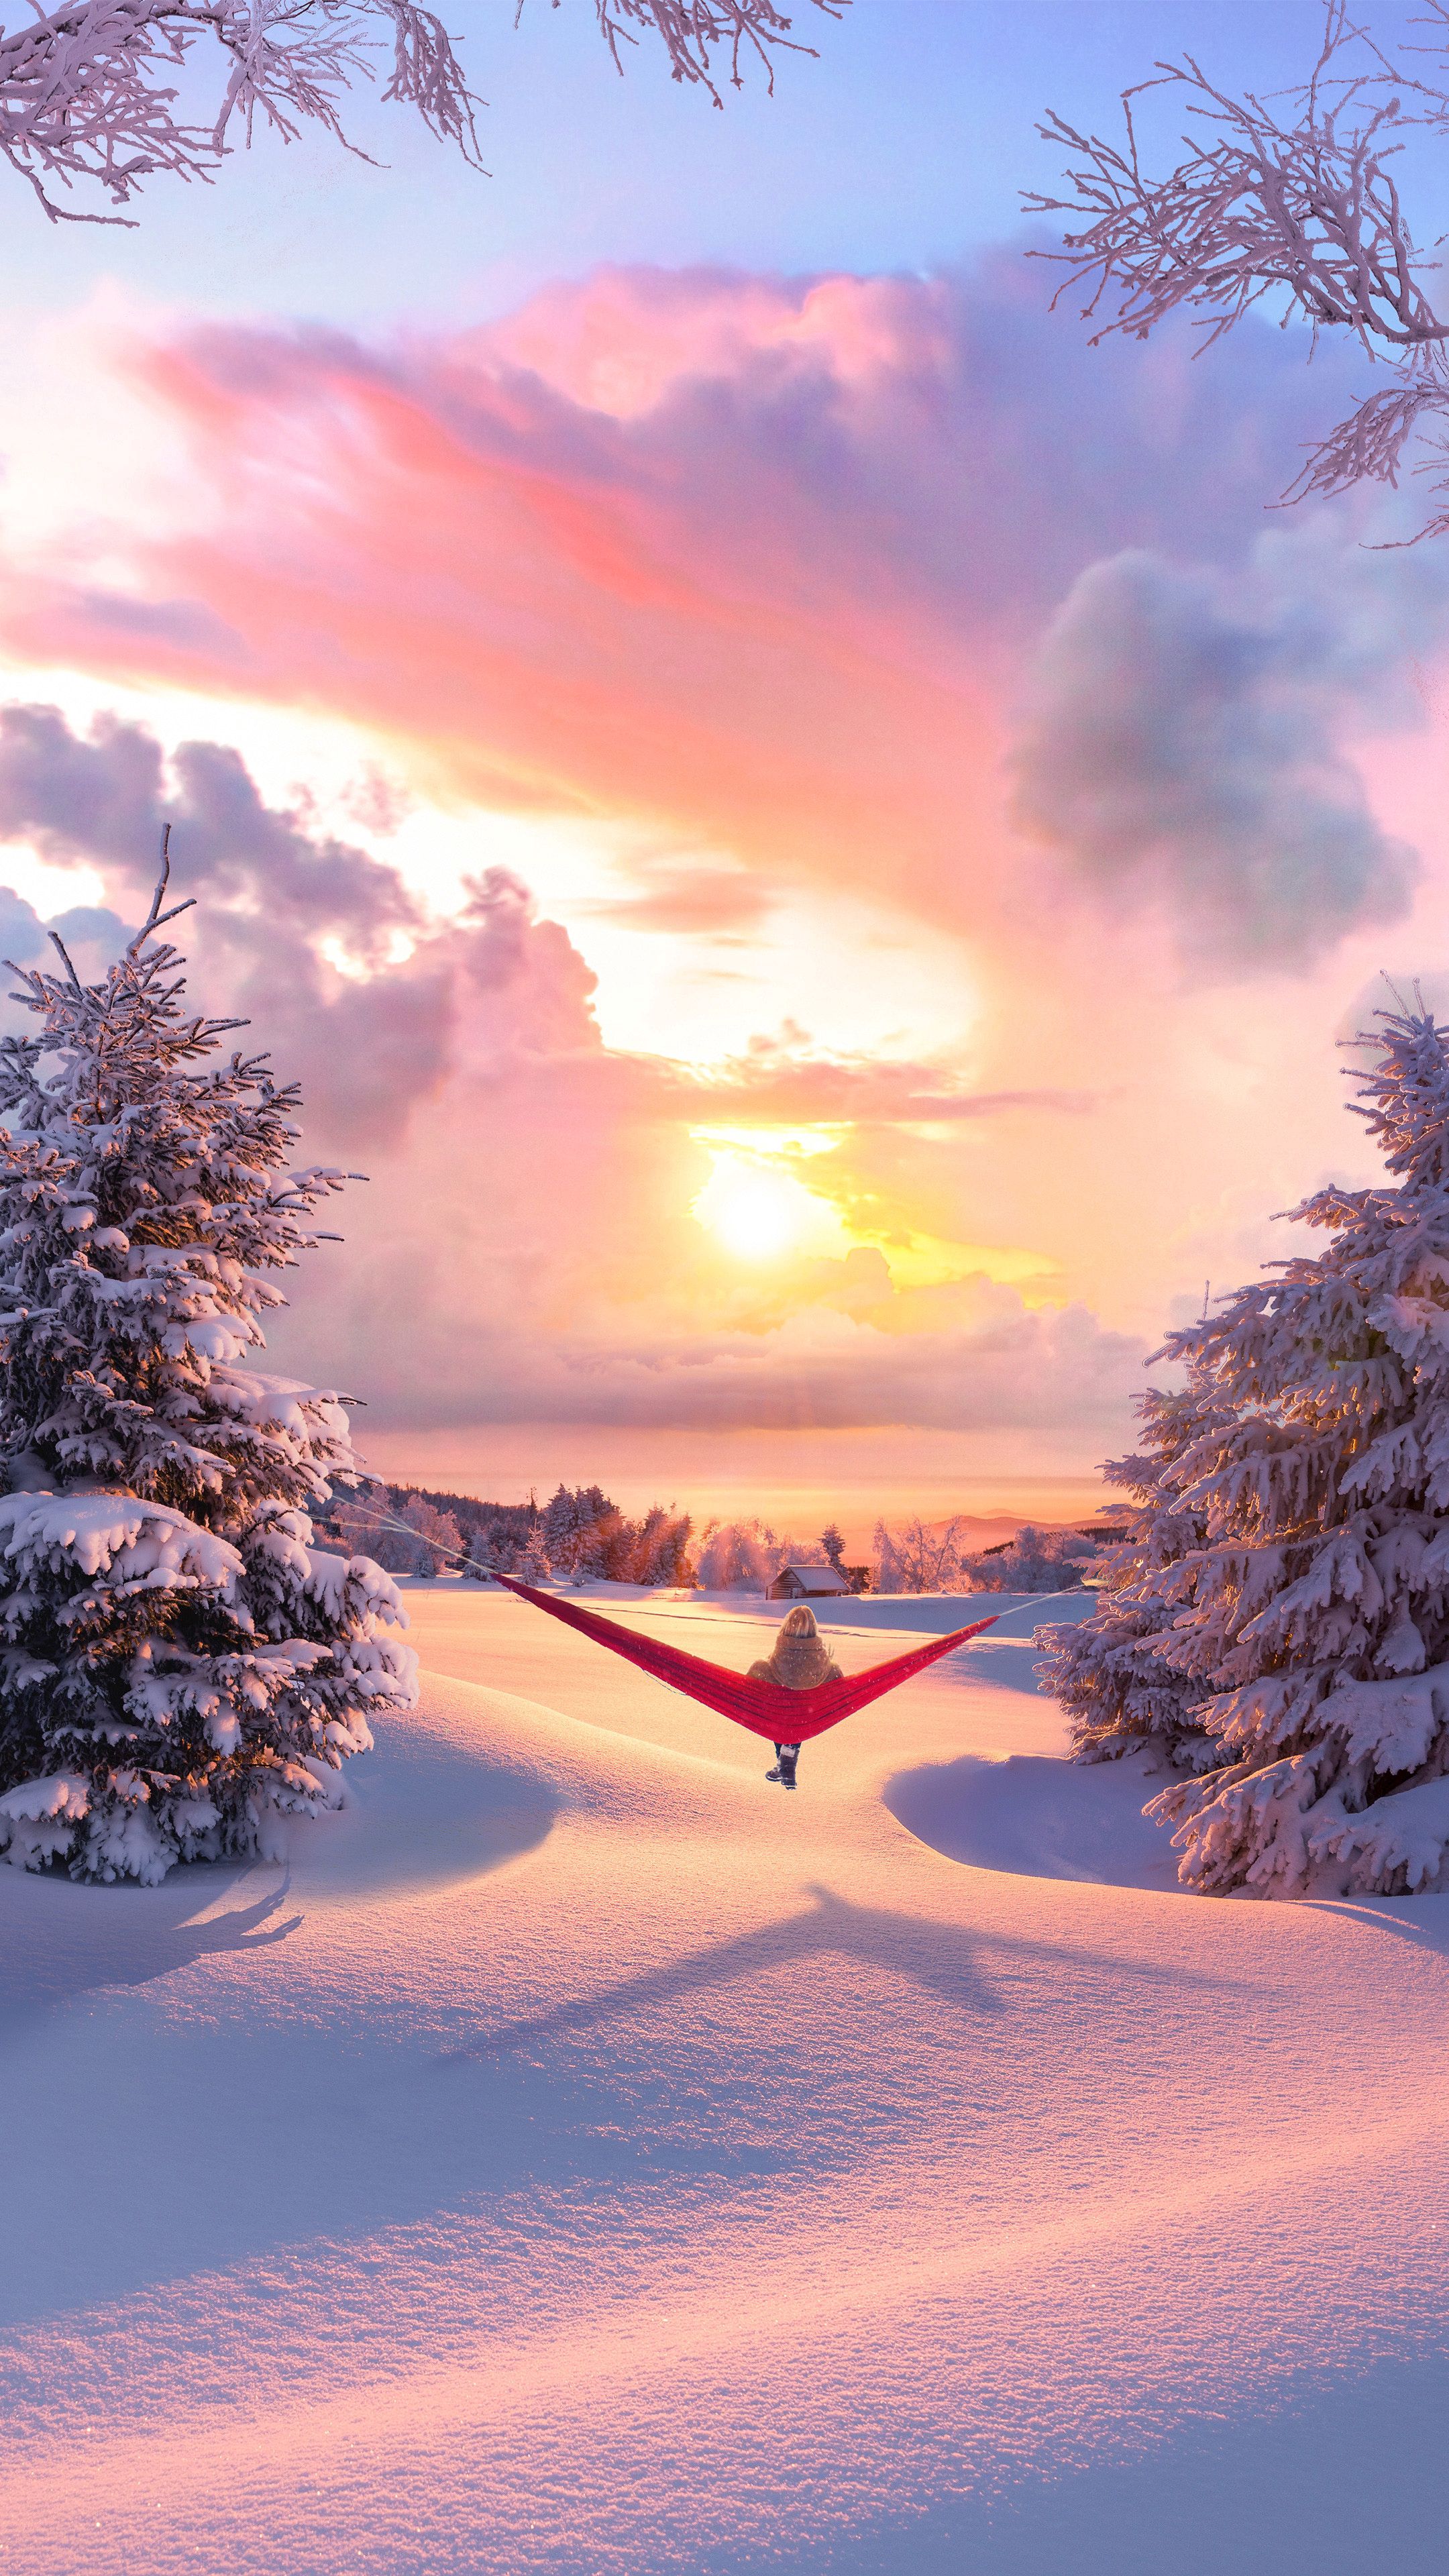 Mobile HD Wallpaper Seclusion hammock, relaxation, landscape, winter